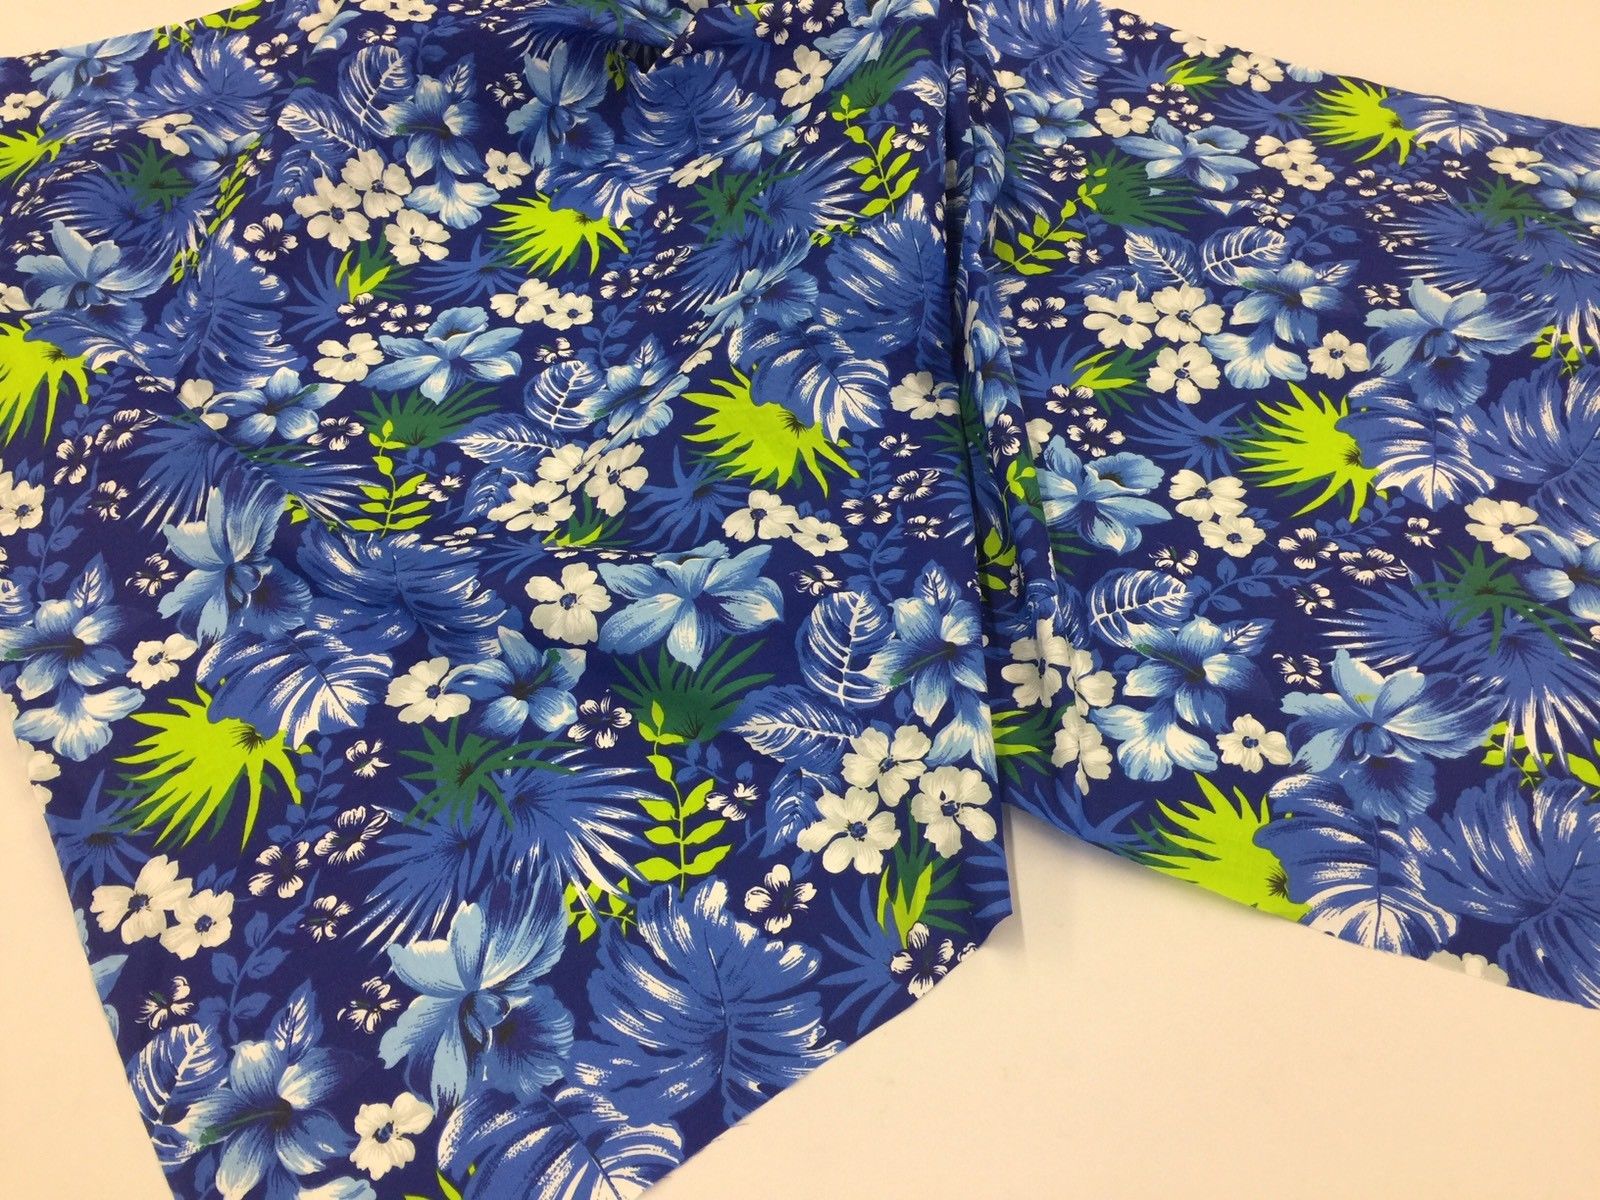 Poly Cotton Print Upholstery & Floral Fabric - Blue and Green Hawaiian ...